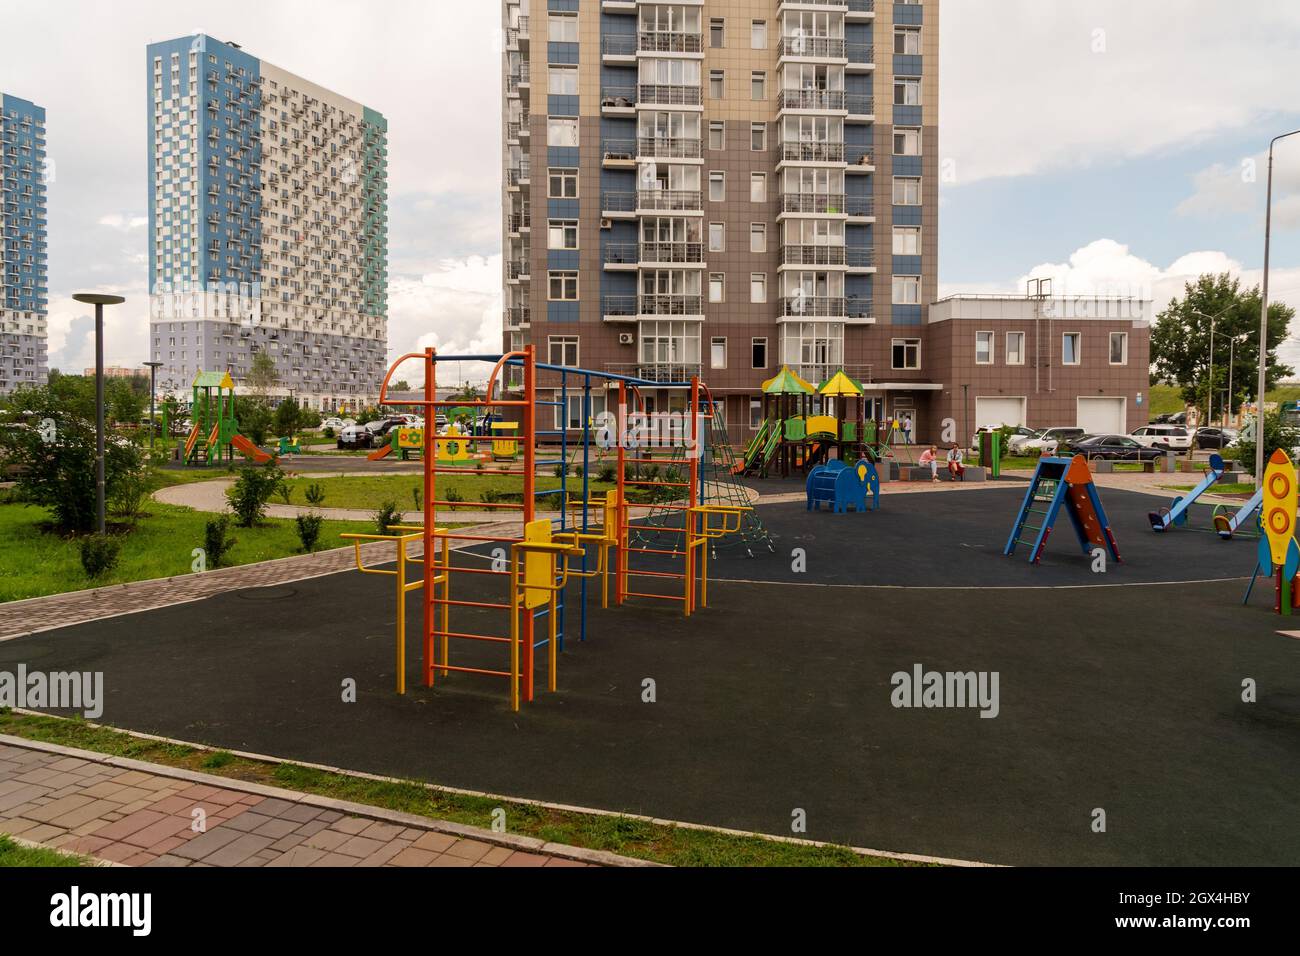 Children's playground and sports ground in the courtyard of a new residential building against the background of other houses on a summer day. Stock Photo